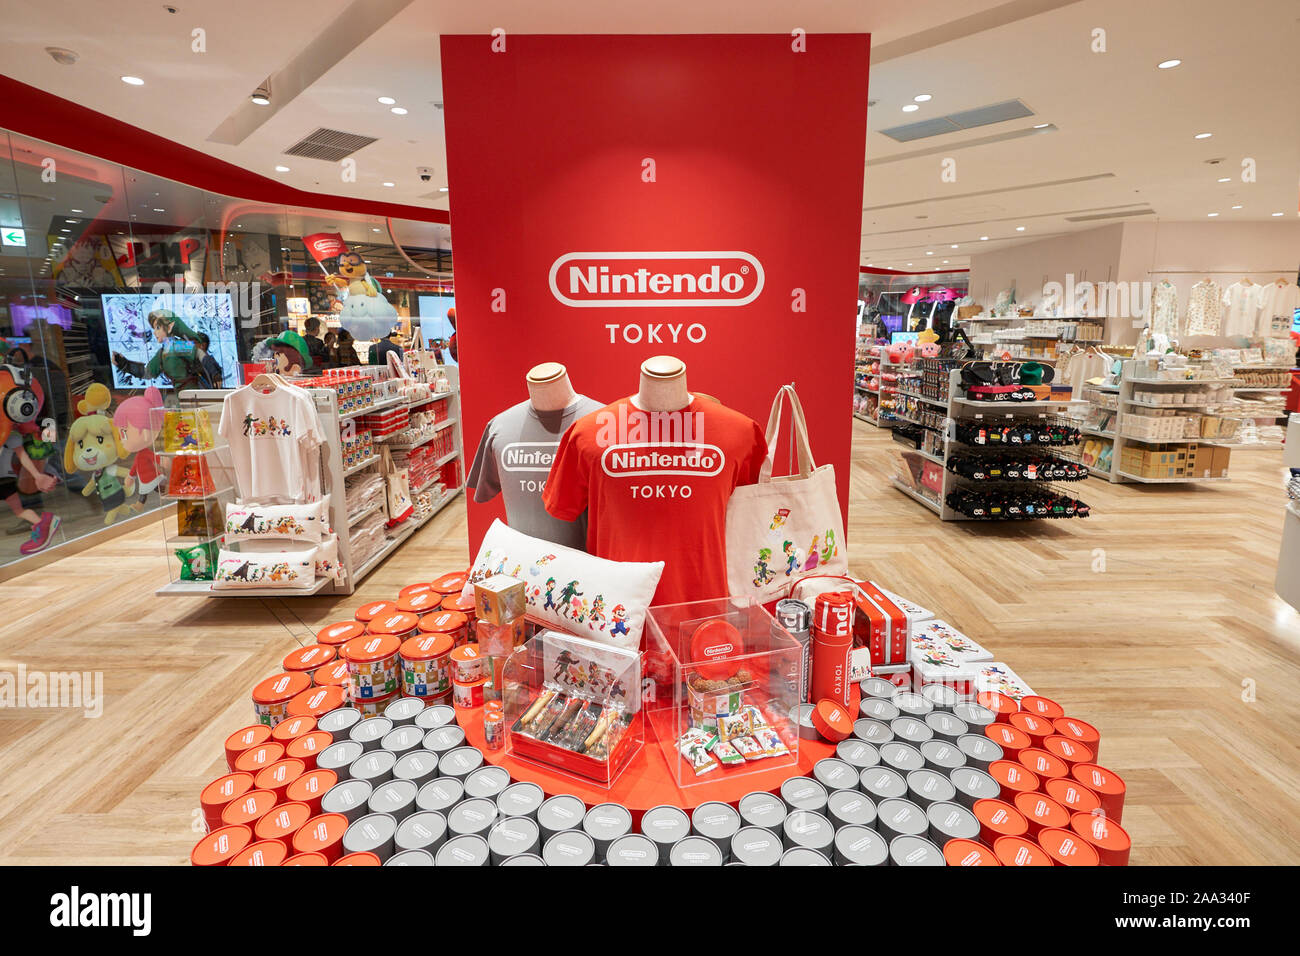 Nintendo's first official store Nintendo TOKYO is unveiled during the  Shibuya PARCO department store press preview in Tokyo, Japan on November  19, 2019. The recently renovated popular shopping complex will open to